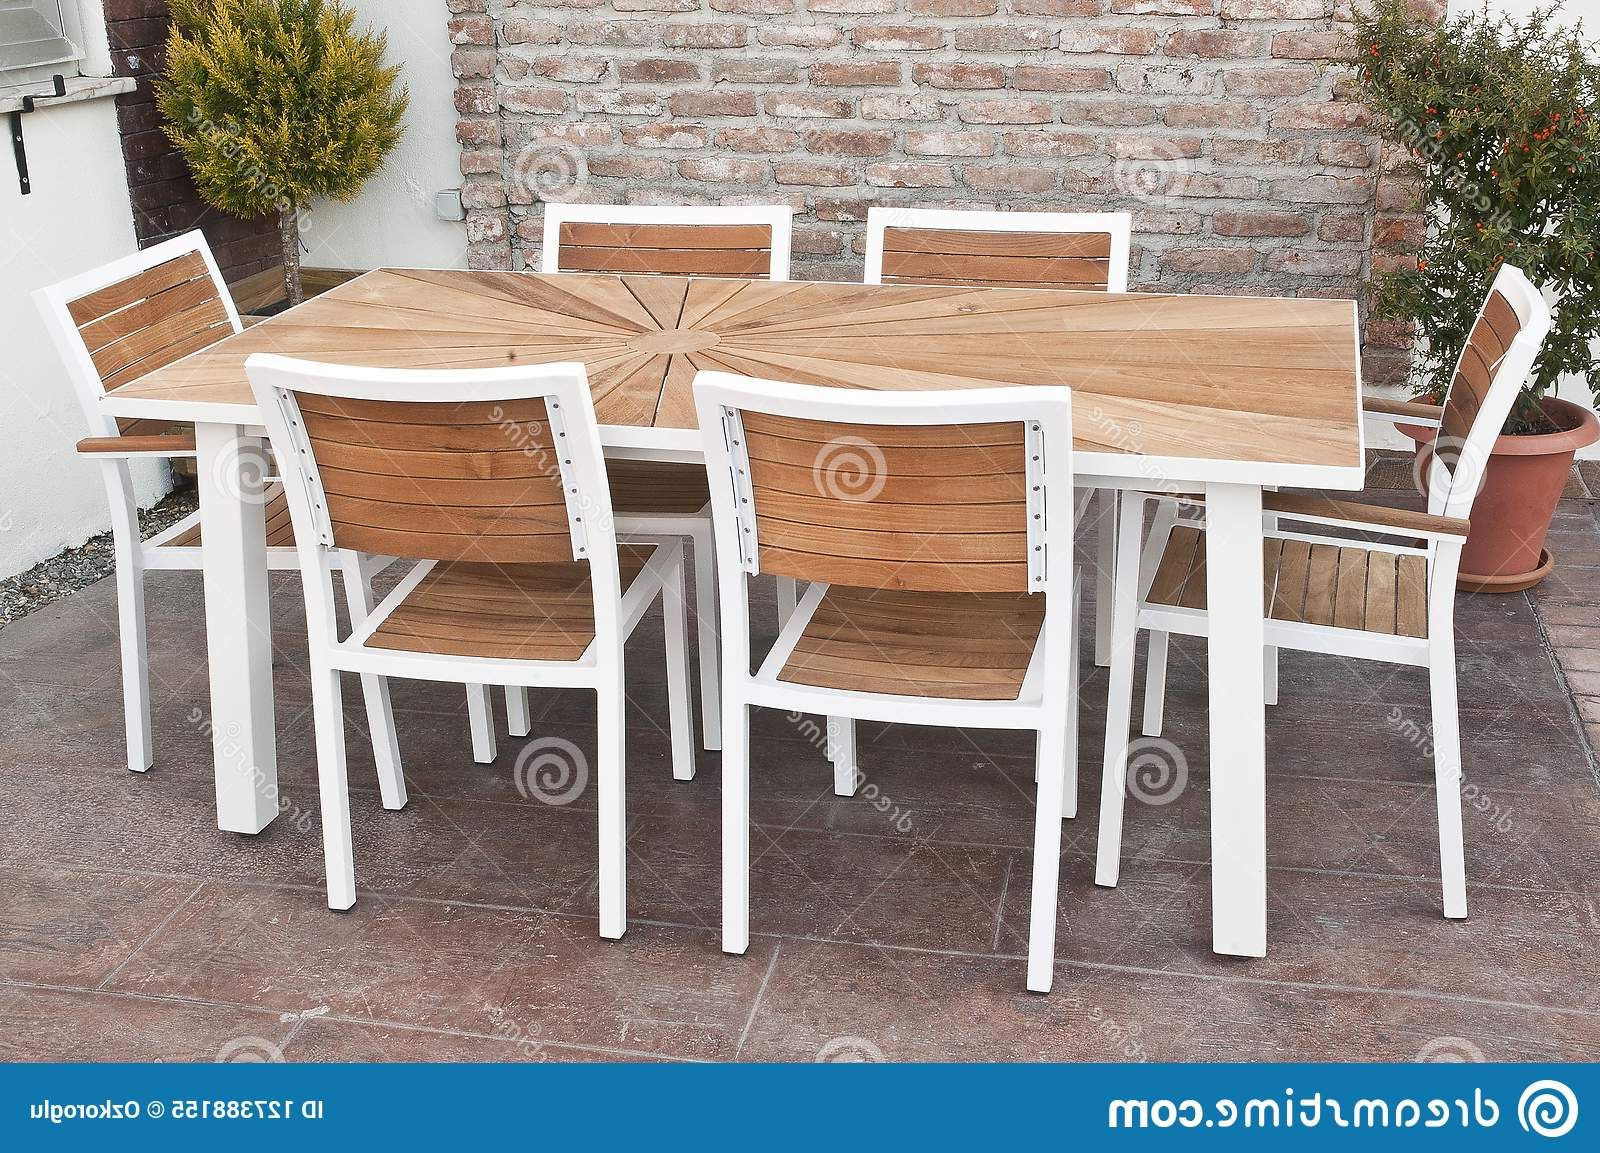 Best And Newest Metal And Wood Outdoor Tables With Metal And Wood Outdoor Patio Furniture For Dining Stock Image – Image Of  Backyard, Chair:  (View 15 of 15)